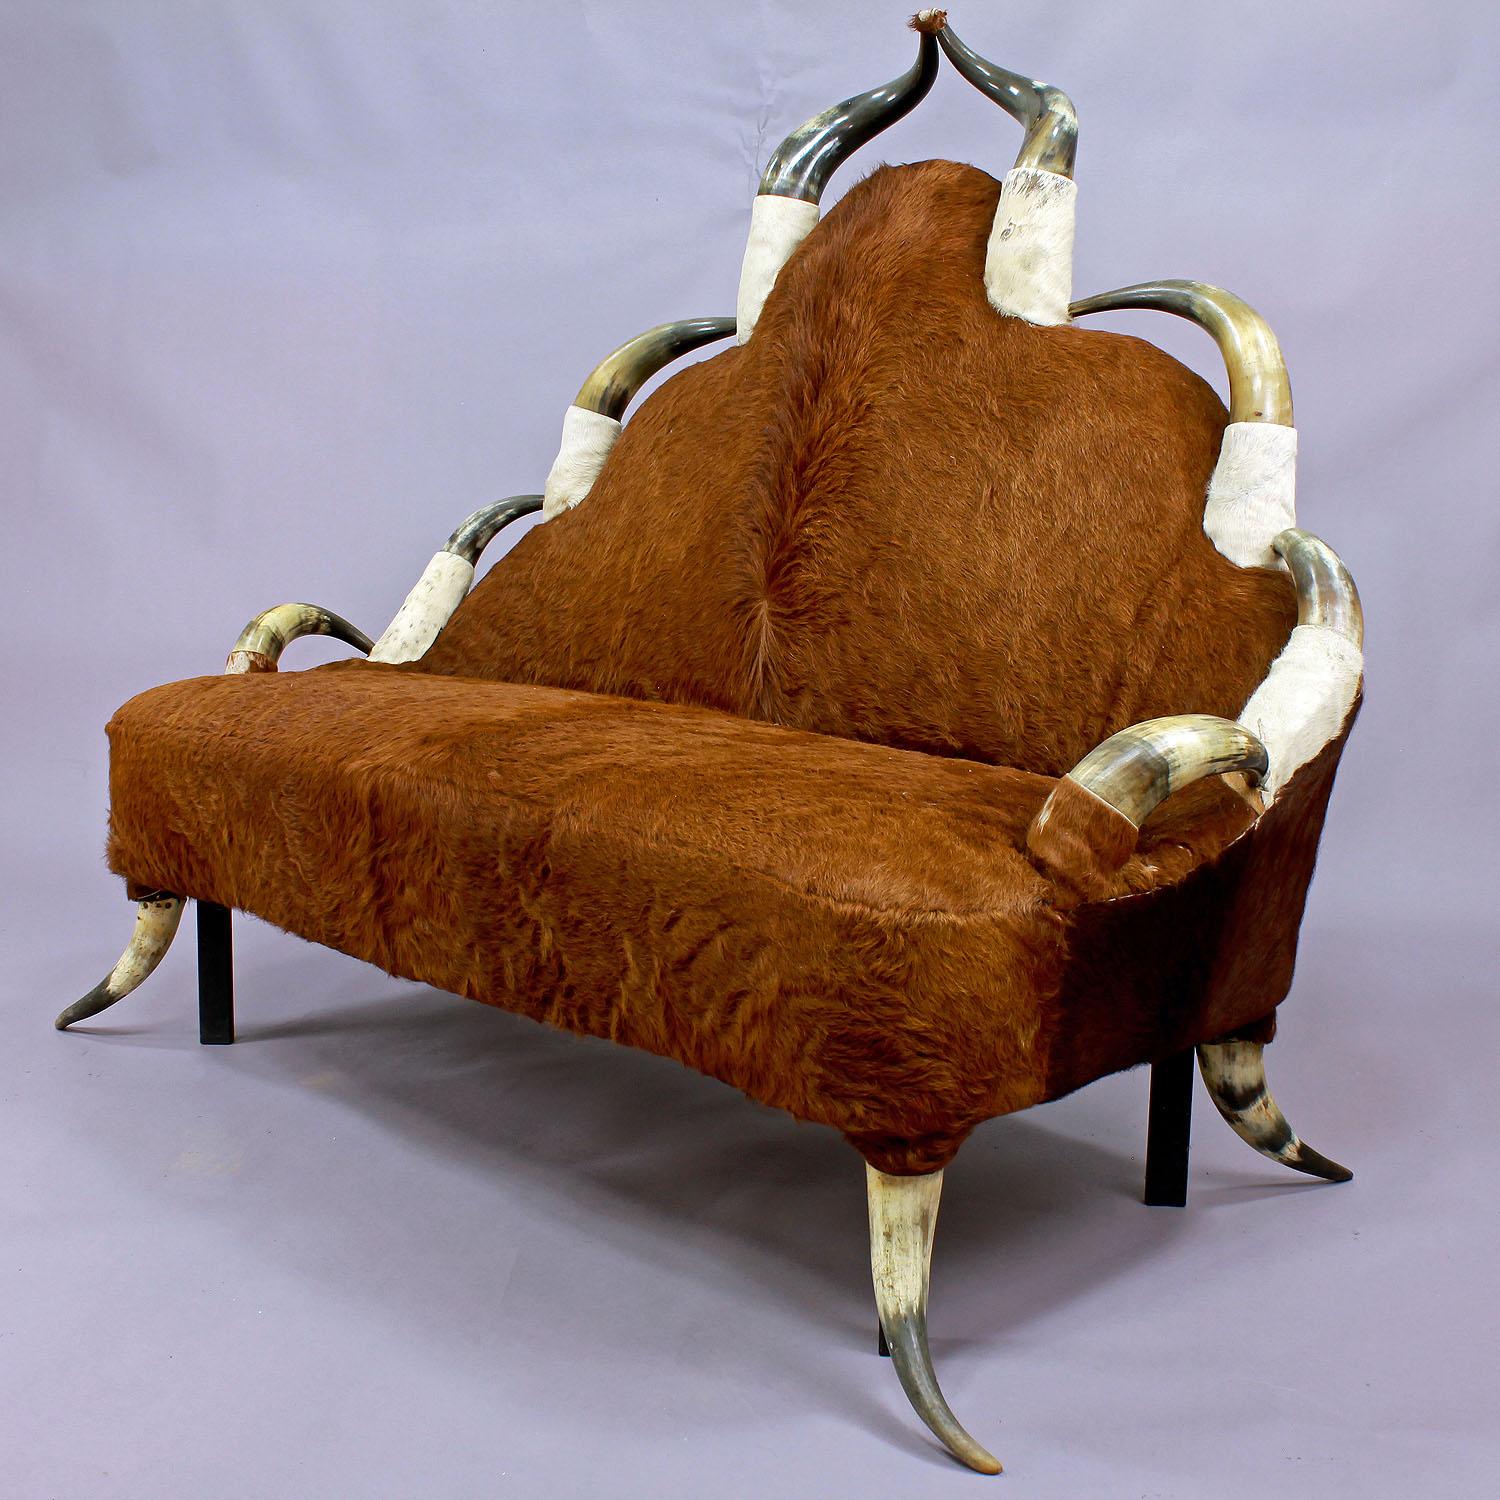 A large bull horn furniture sofa, circa 1870, decorated with a set of antique long horns and covered with vintage cow coat (has to be renewed, is losing the hairs). Iron legs improve stability. Manufactured in Austria, circa 1870.

Please contact us